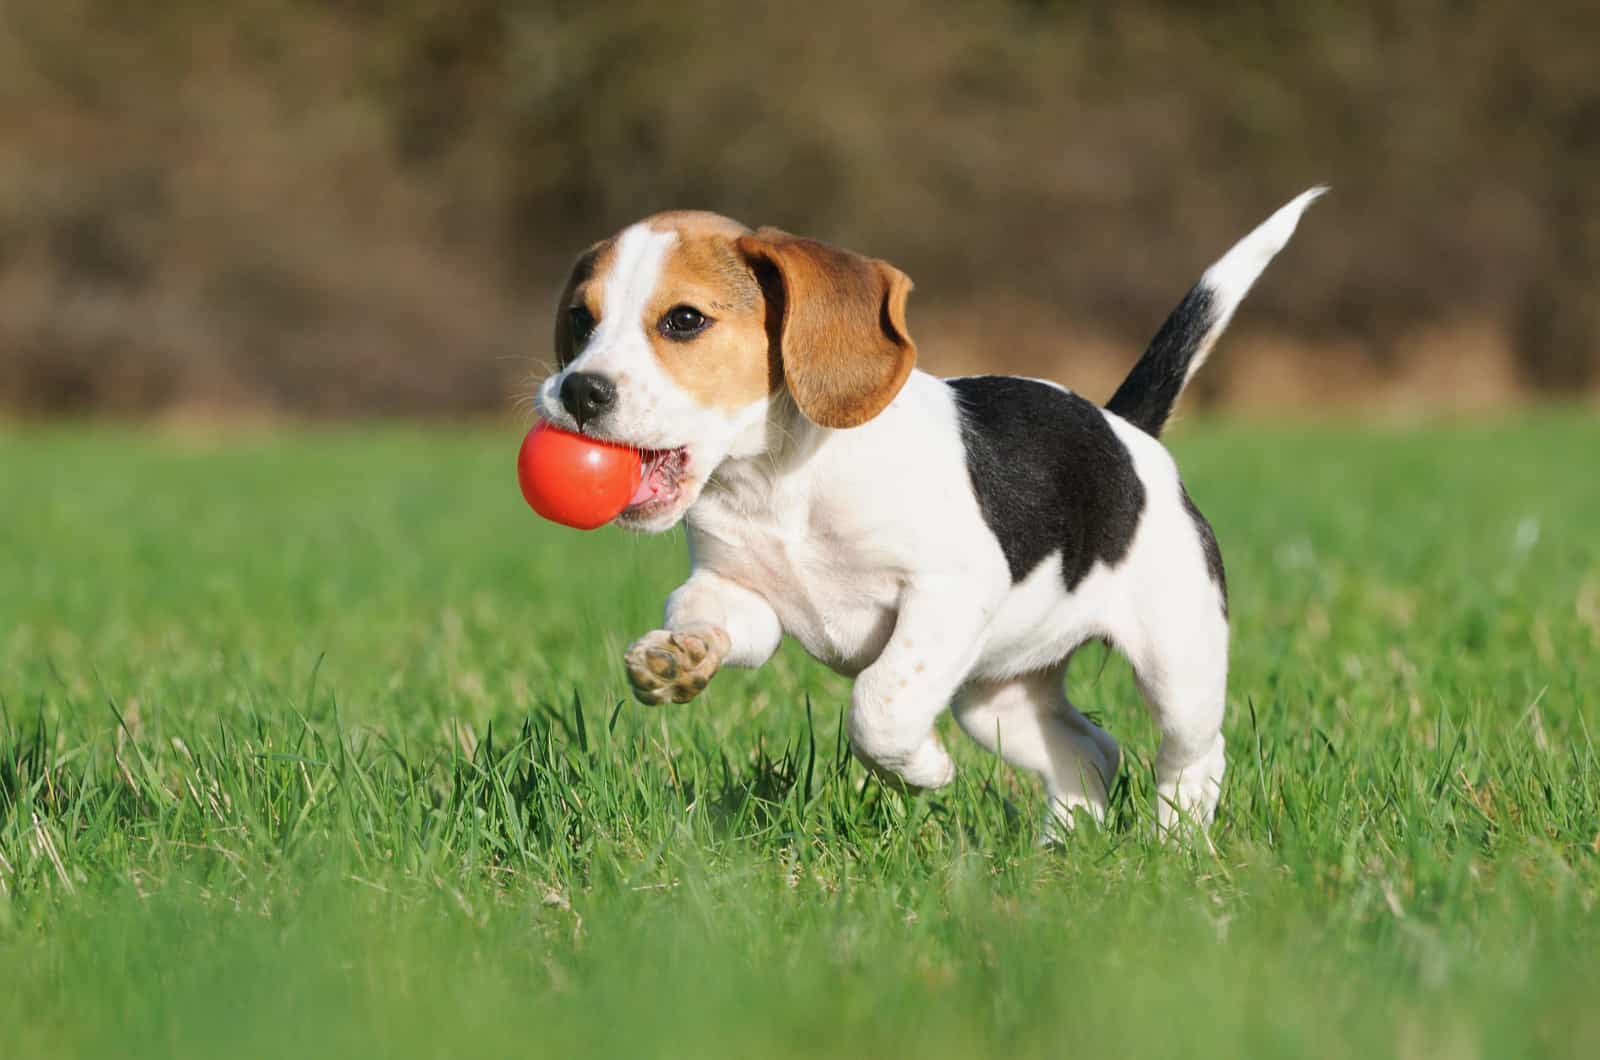 Beagle runs with the ball in his mouth